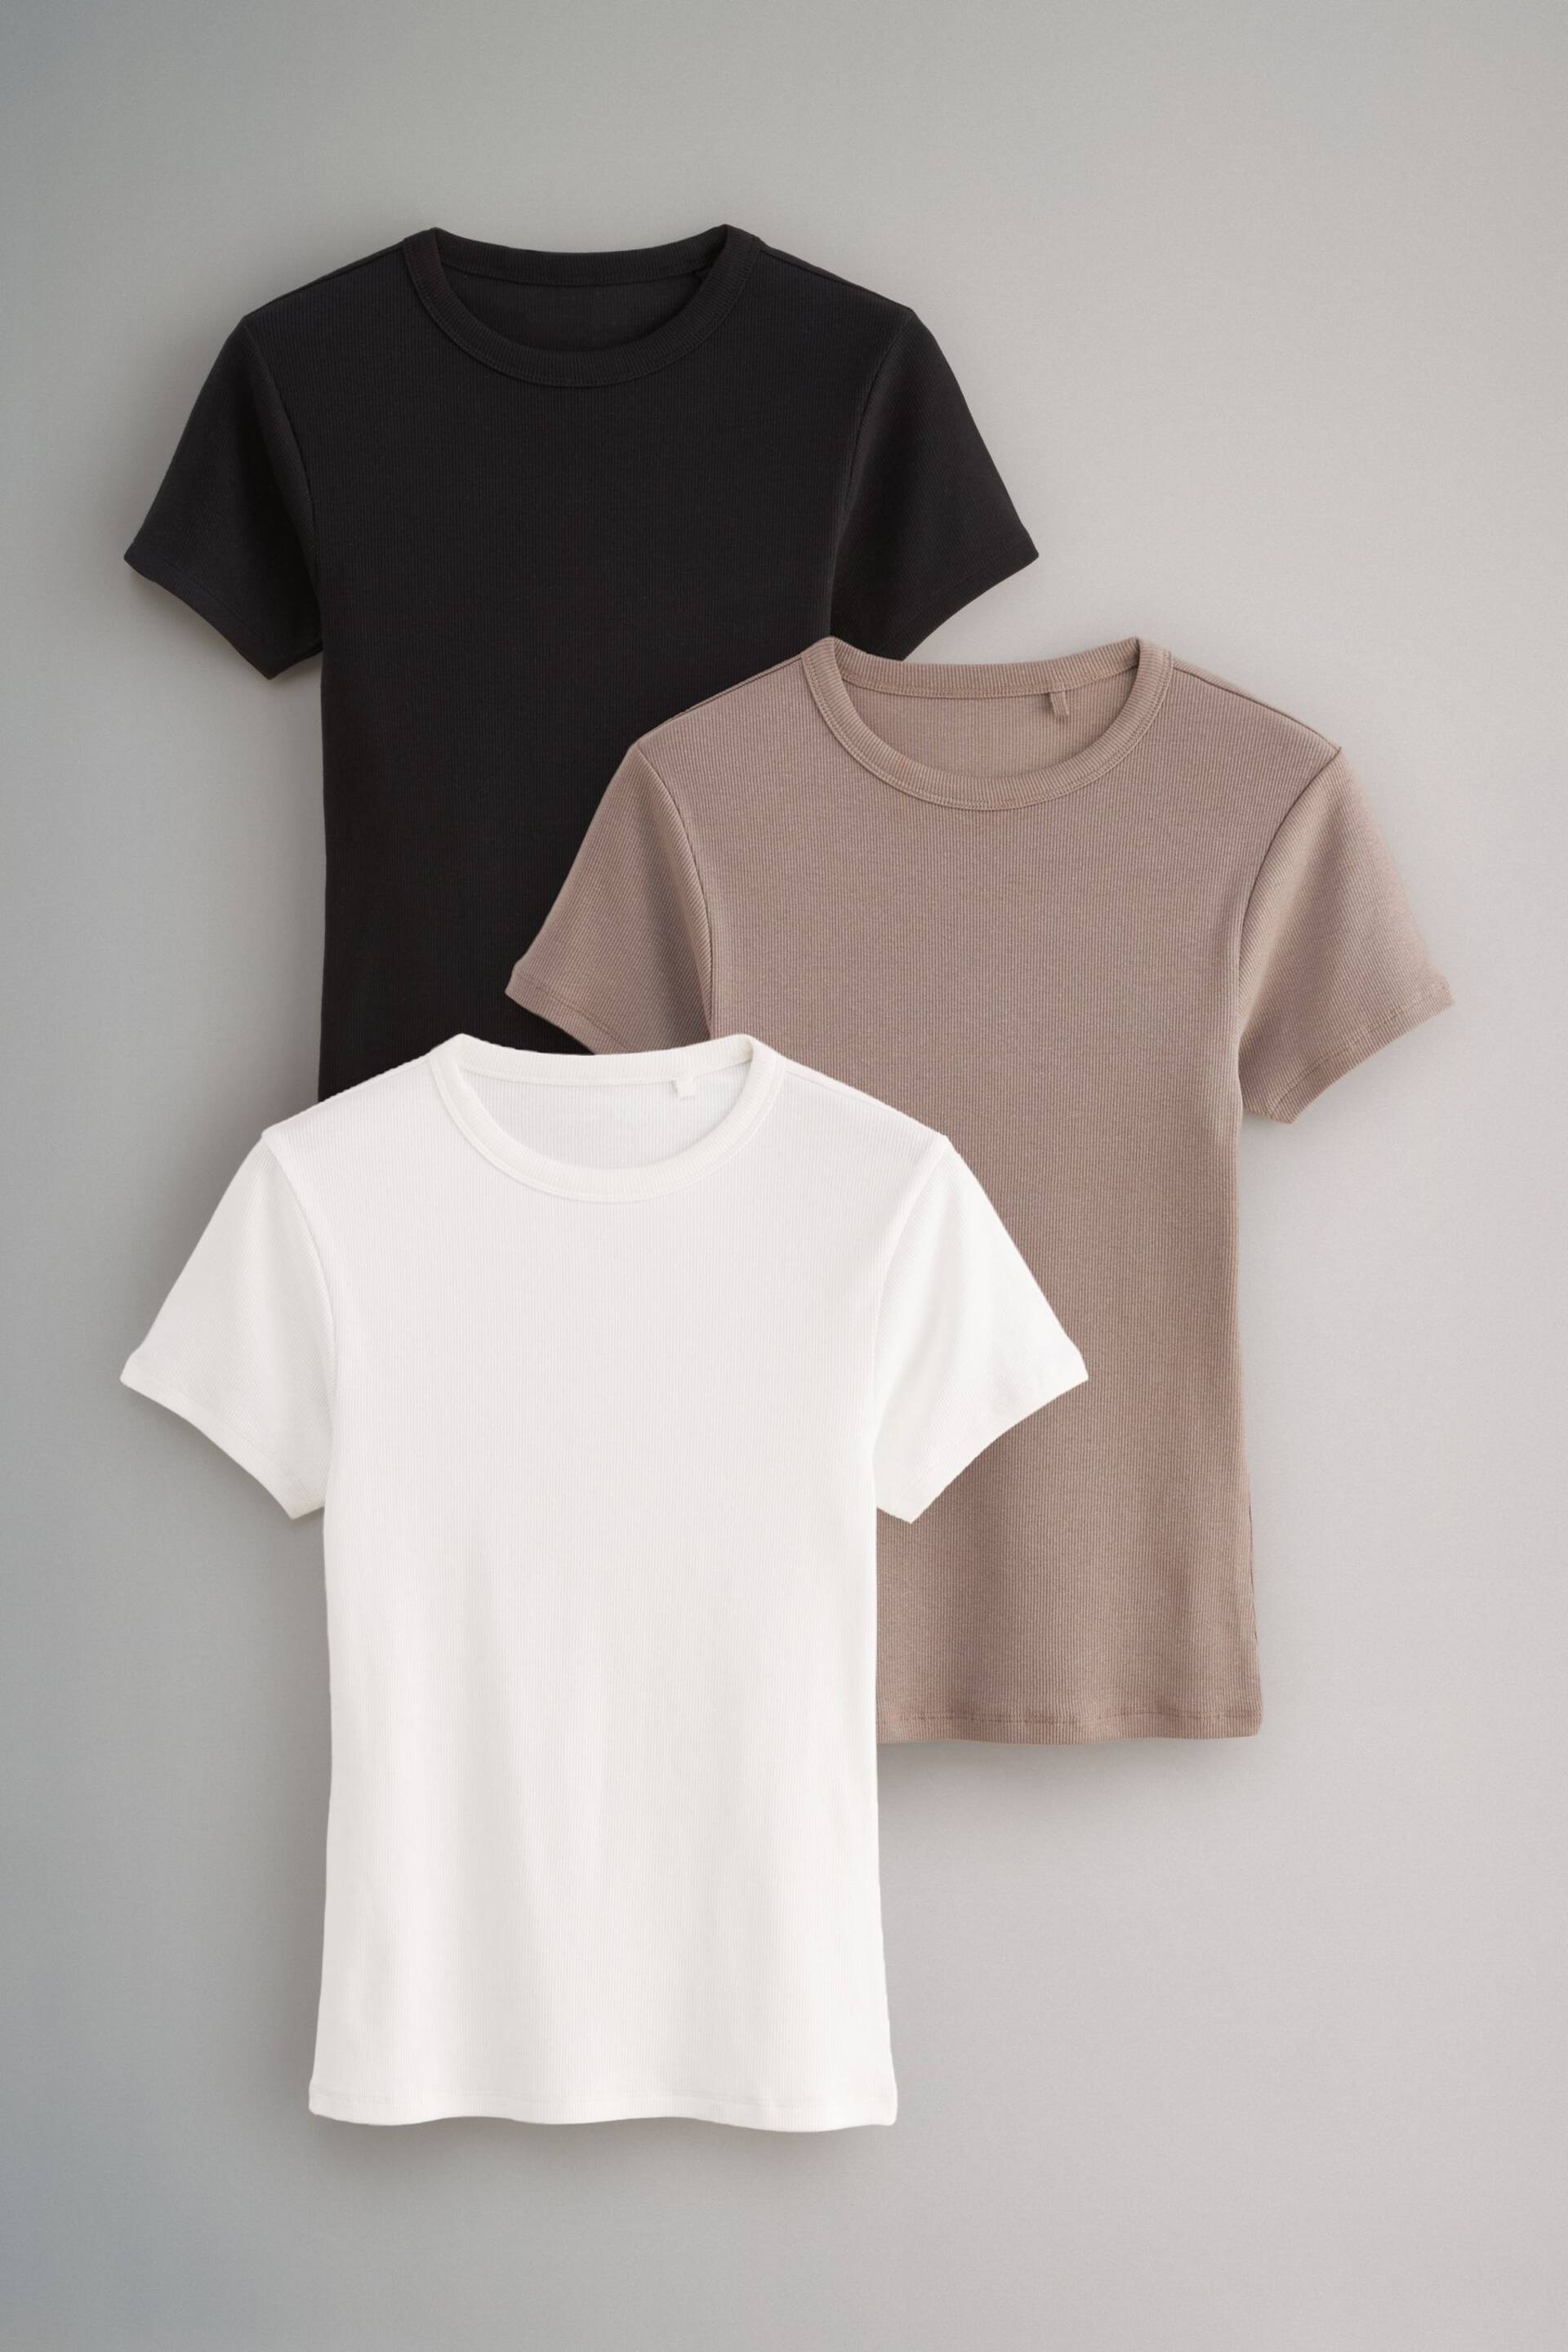 The Set Black/Taupe Brown/White 3 Pack Ribbed Short Sleeve T-Shirts - Image 2 of 8